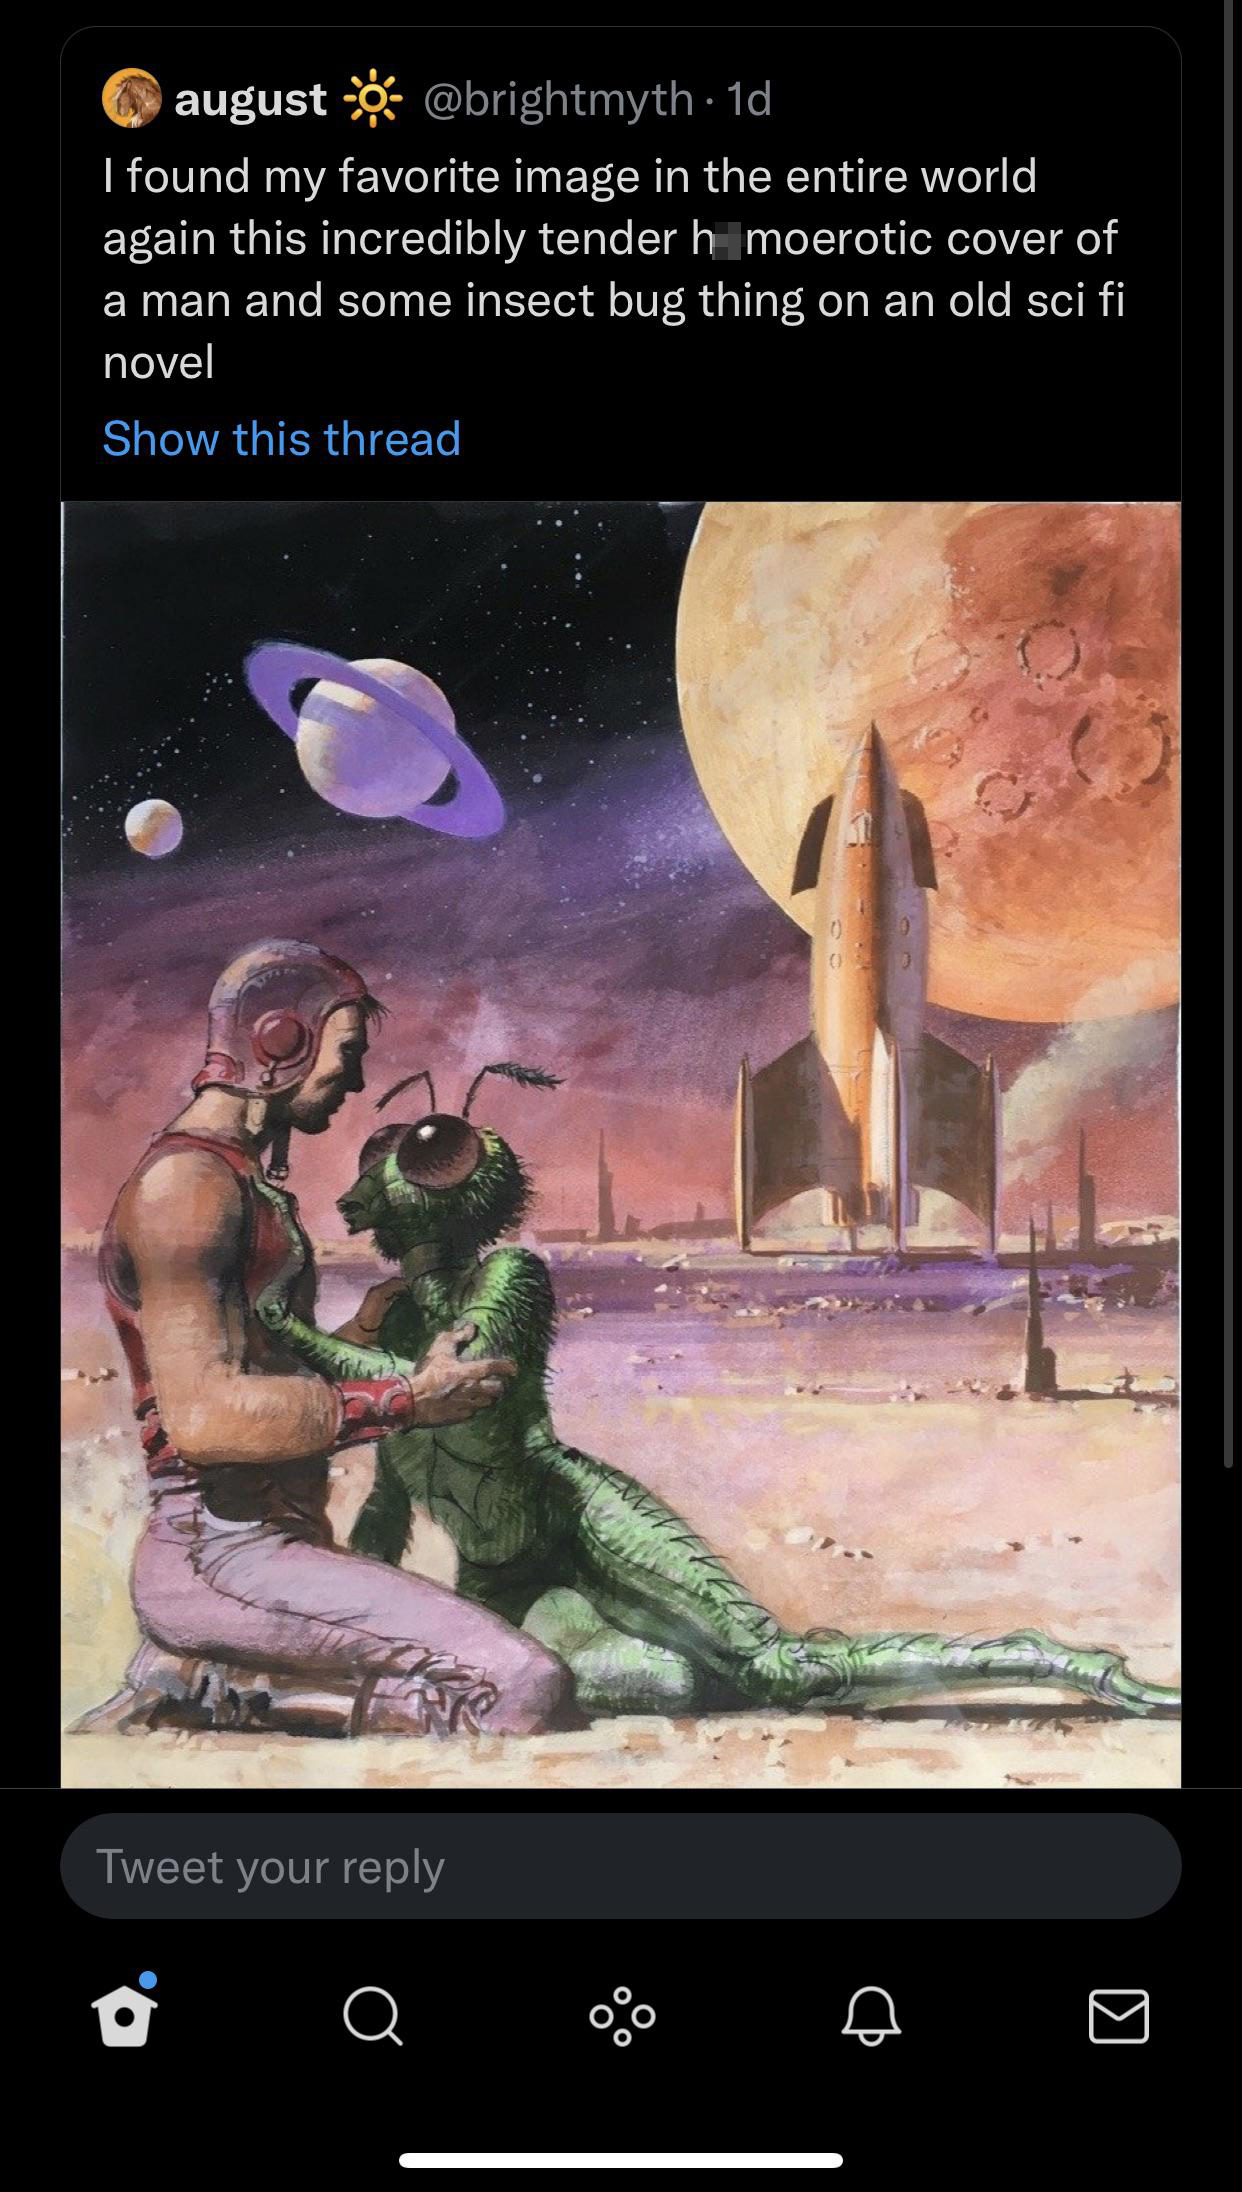 funny tweets - pulp sci fi art - august 10 I found my favorite image in the entire world again this incredibly tender h moerotic cover of a man and some insect bug thing on an old sci fi novel Show this thread Tweet your